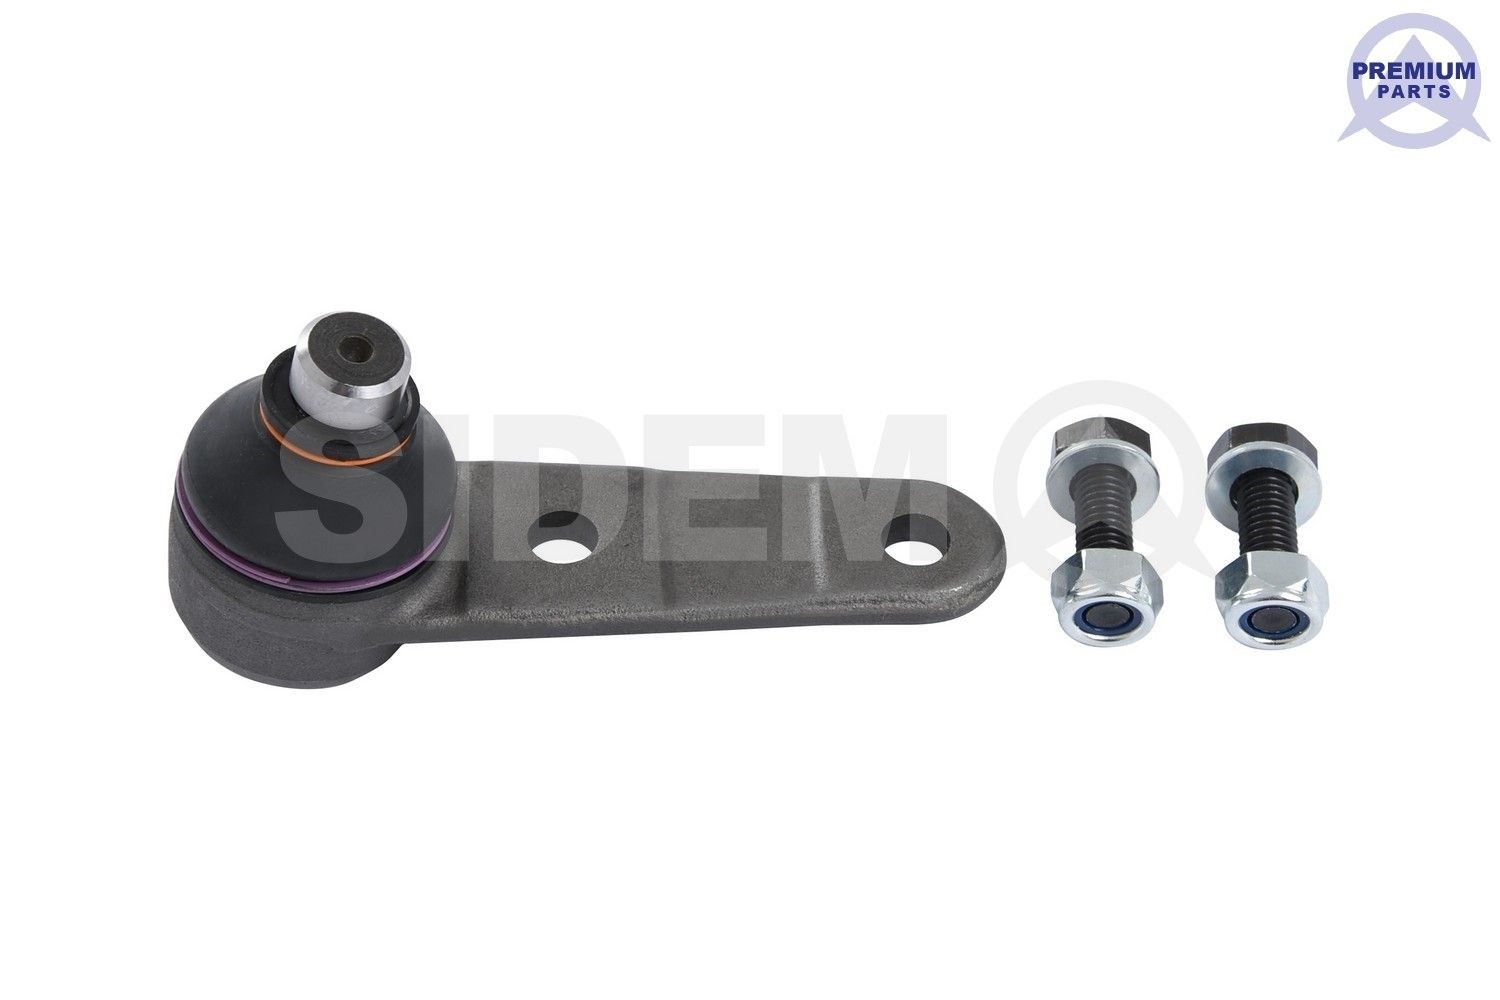 SIDEM 3488 Ball Joint Front Axle, 17mm